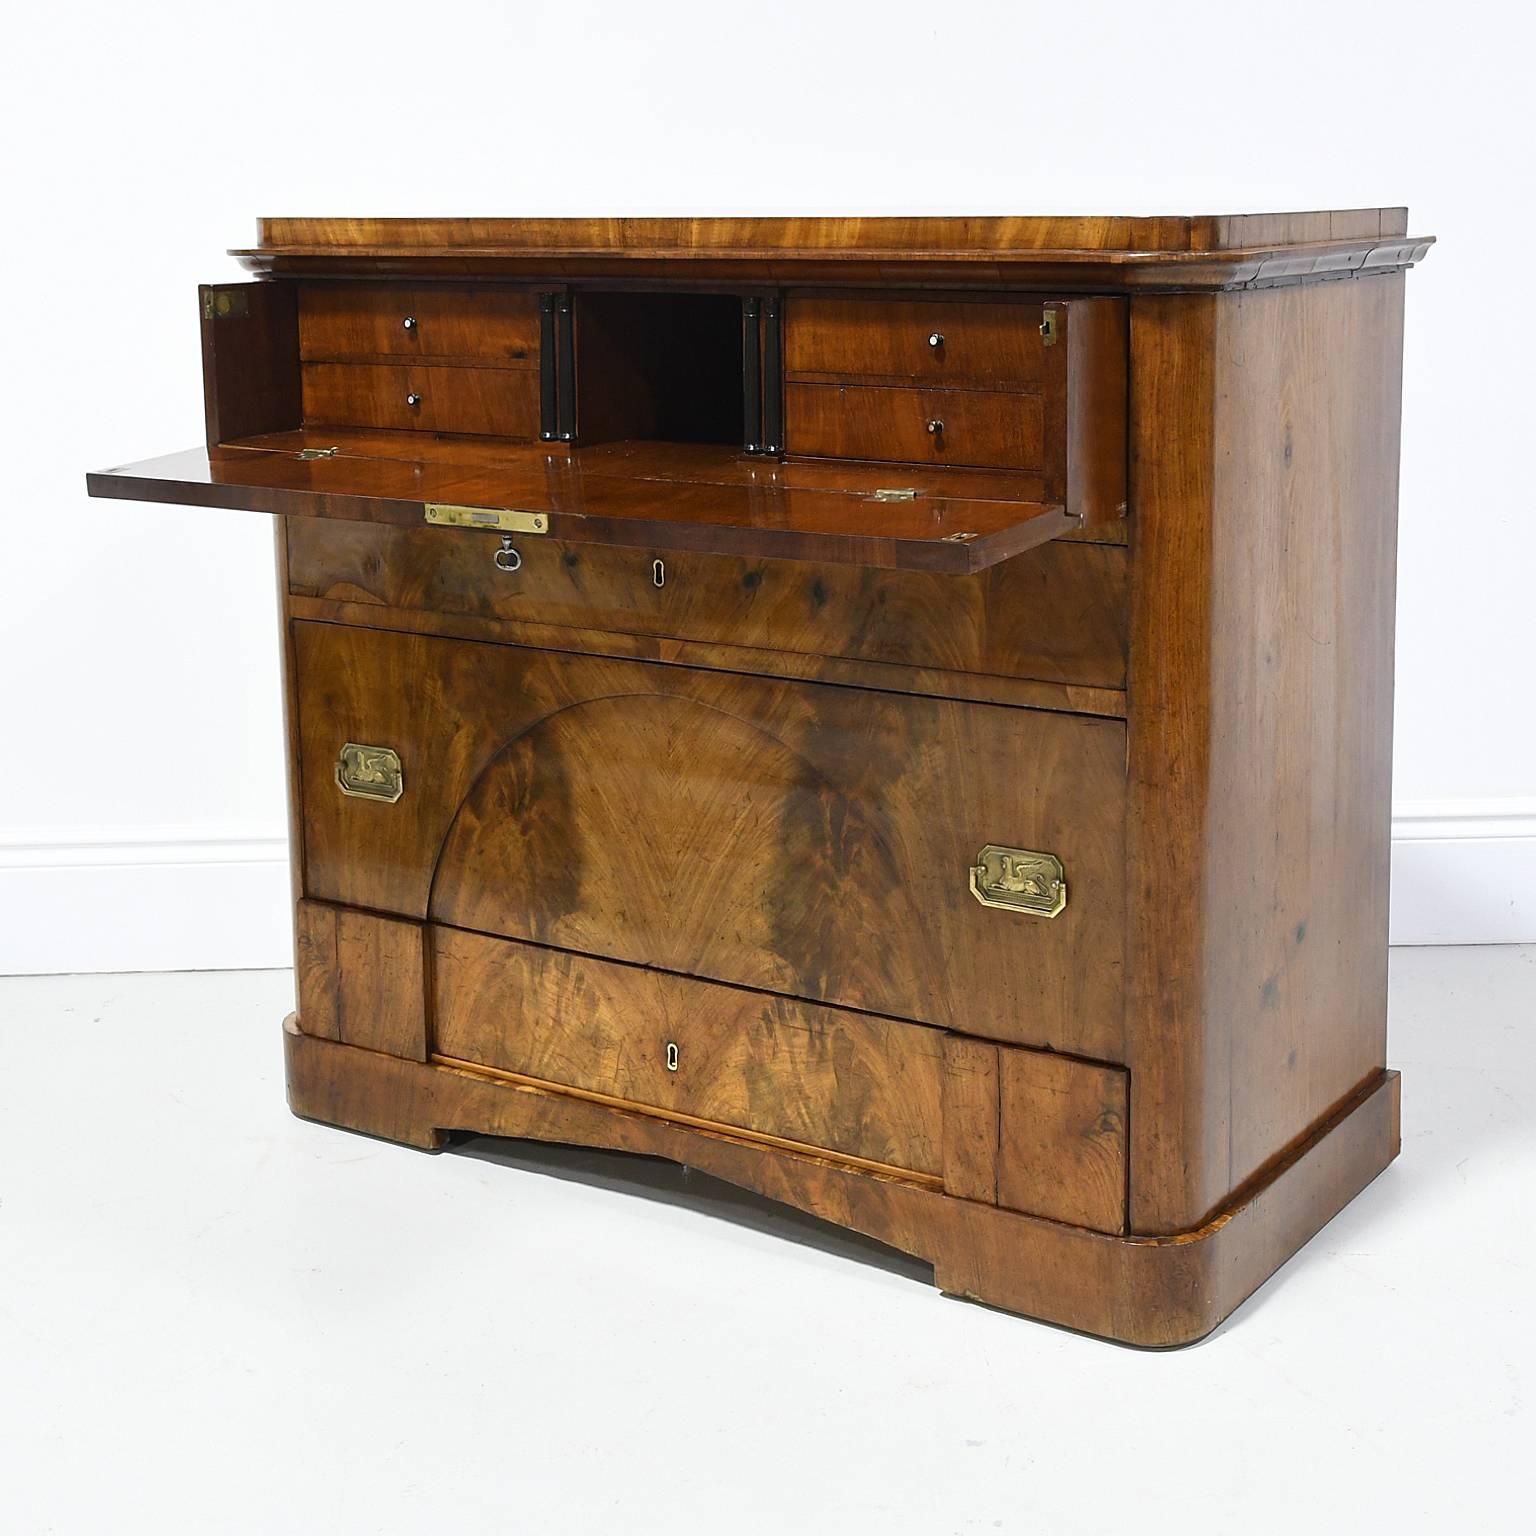 Polished North German Biedermeier Chest of Drawers with Secretary in Mahogany, circa 1830